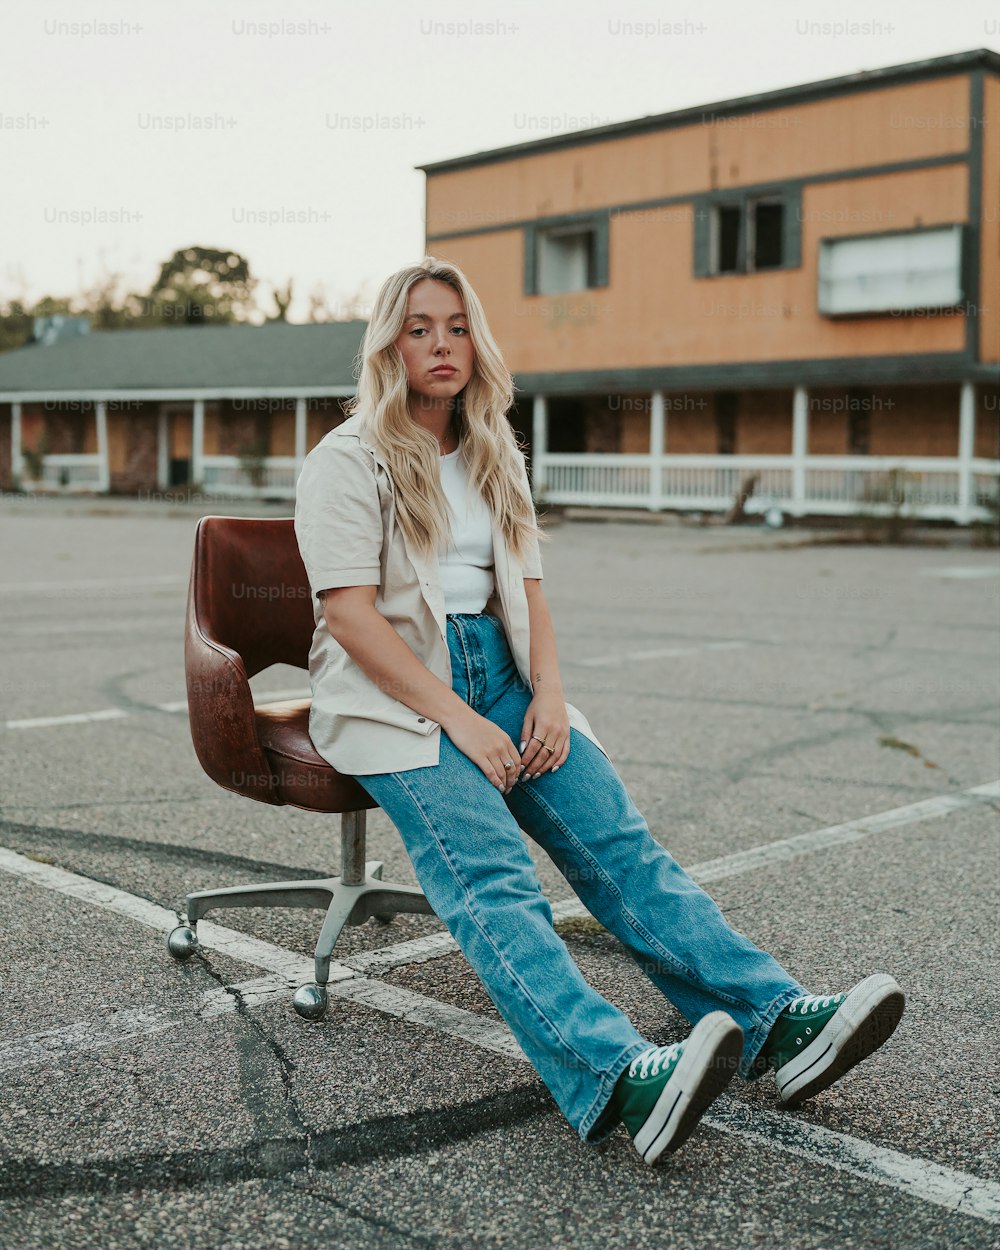 a woman sitting on a chair in a parking lot